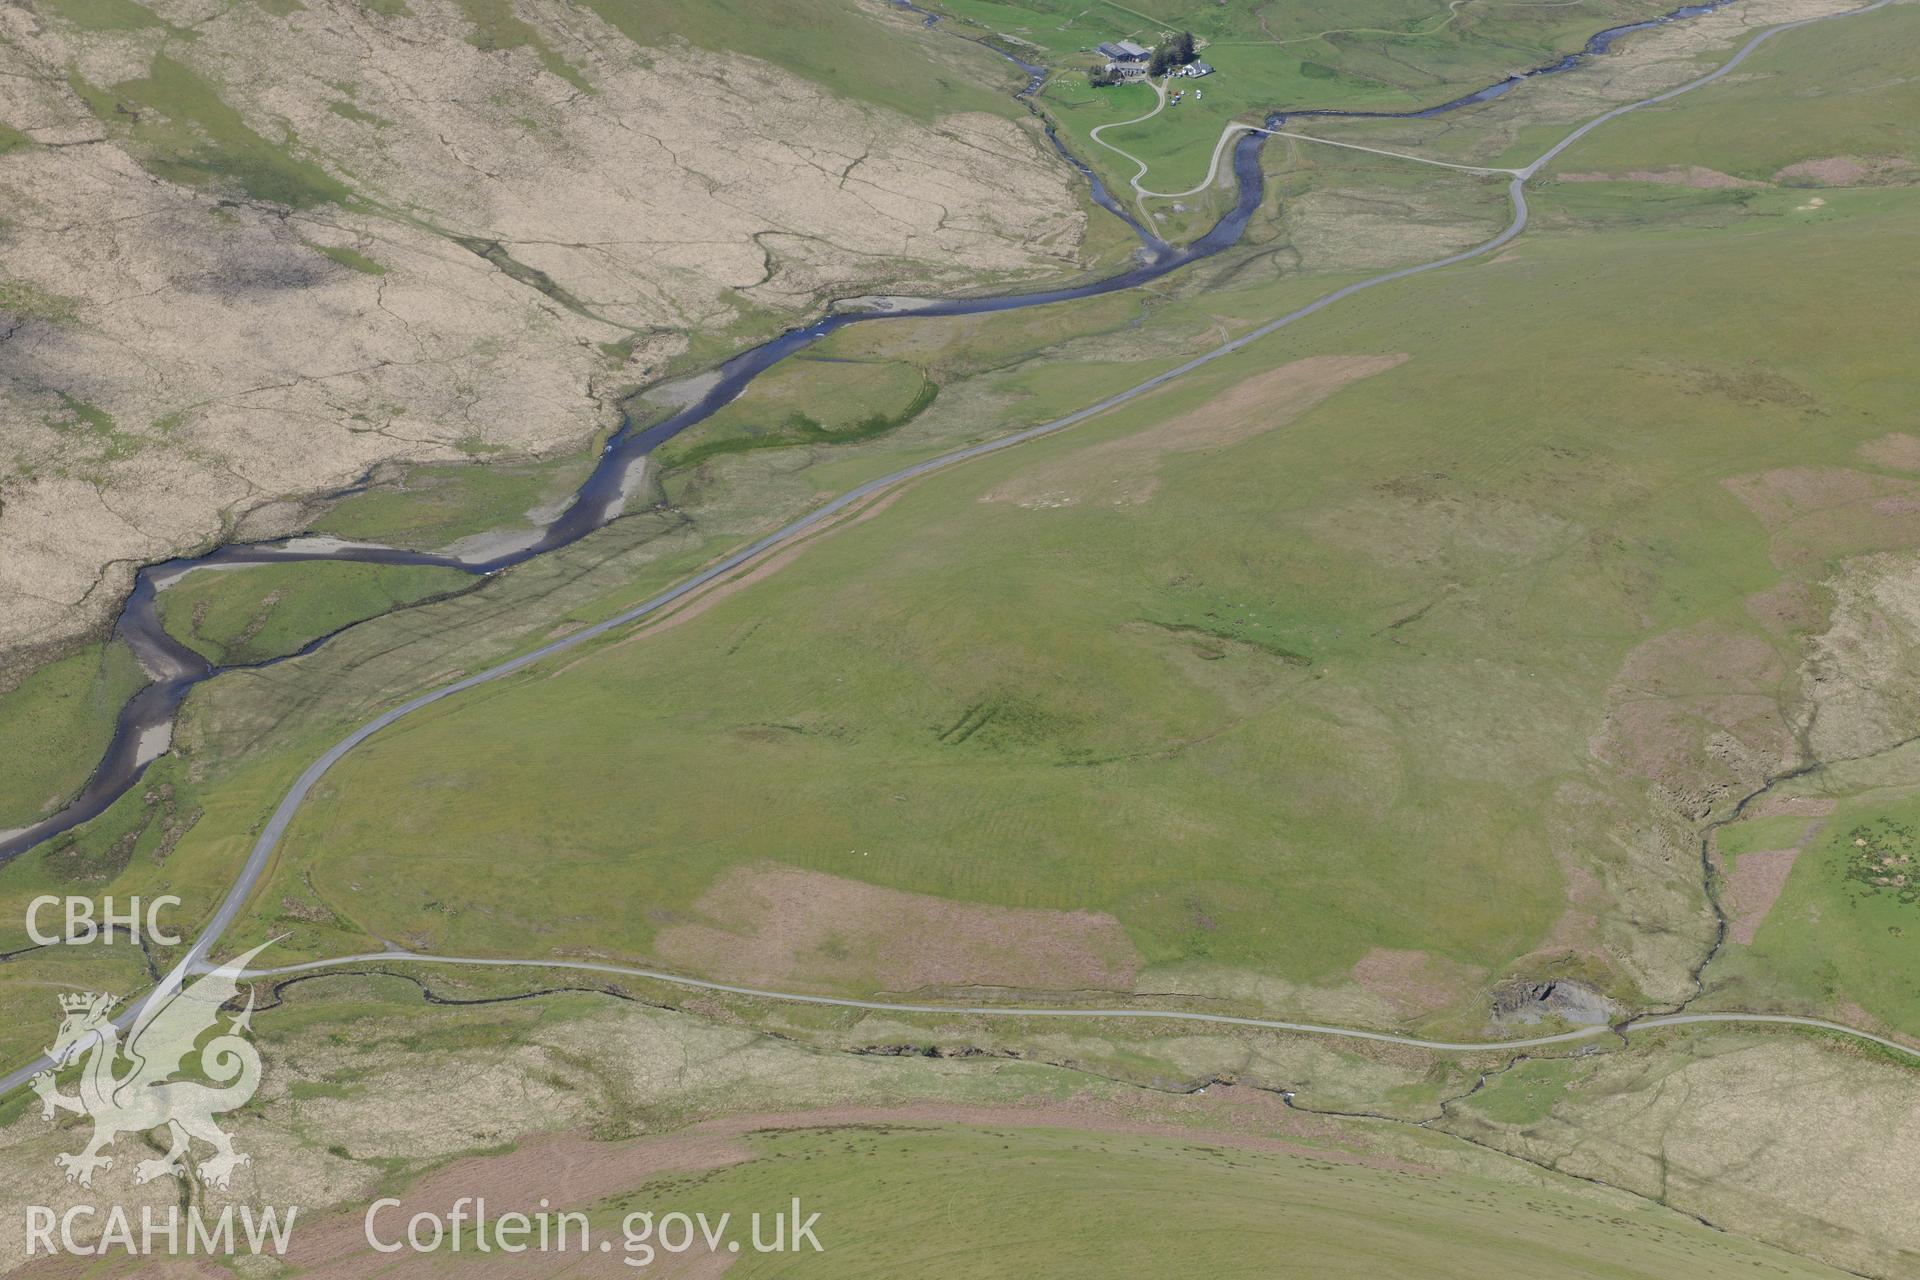 Aberglanhirin farm and bridge, Aberhenllan bridge and Esgair-y-Ty rabbit warren. Oblique aerial photograph taken during the Royal Commission's programme of archaeological aerial reconnaissance by Toby Driver on 3rd June 2015.